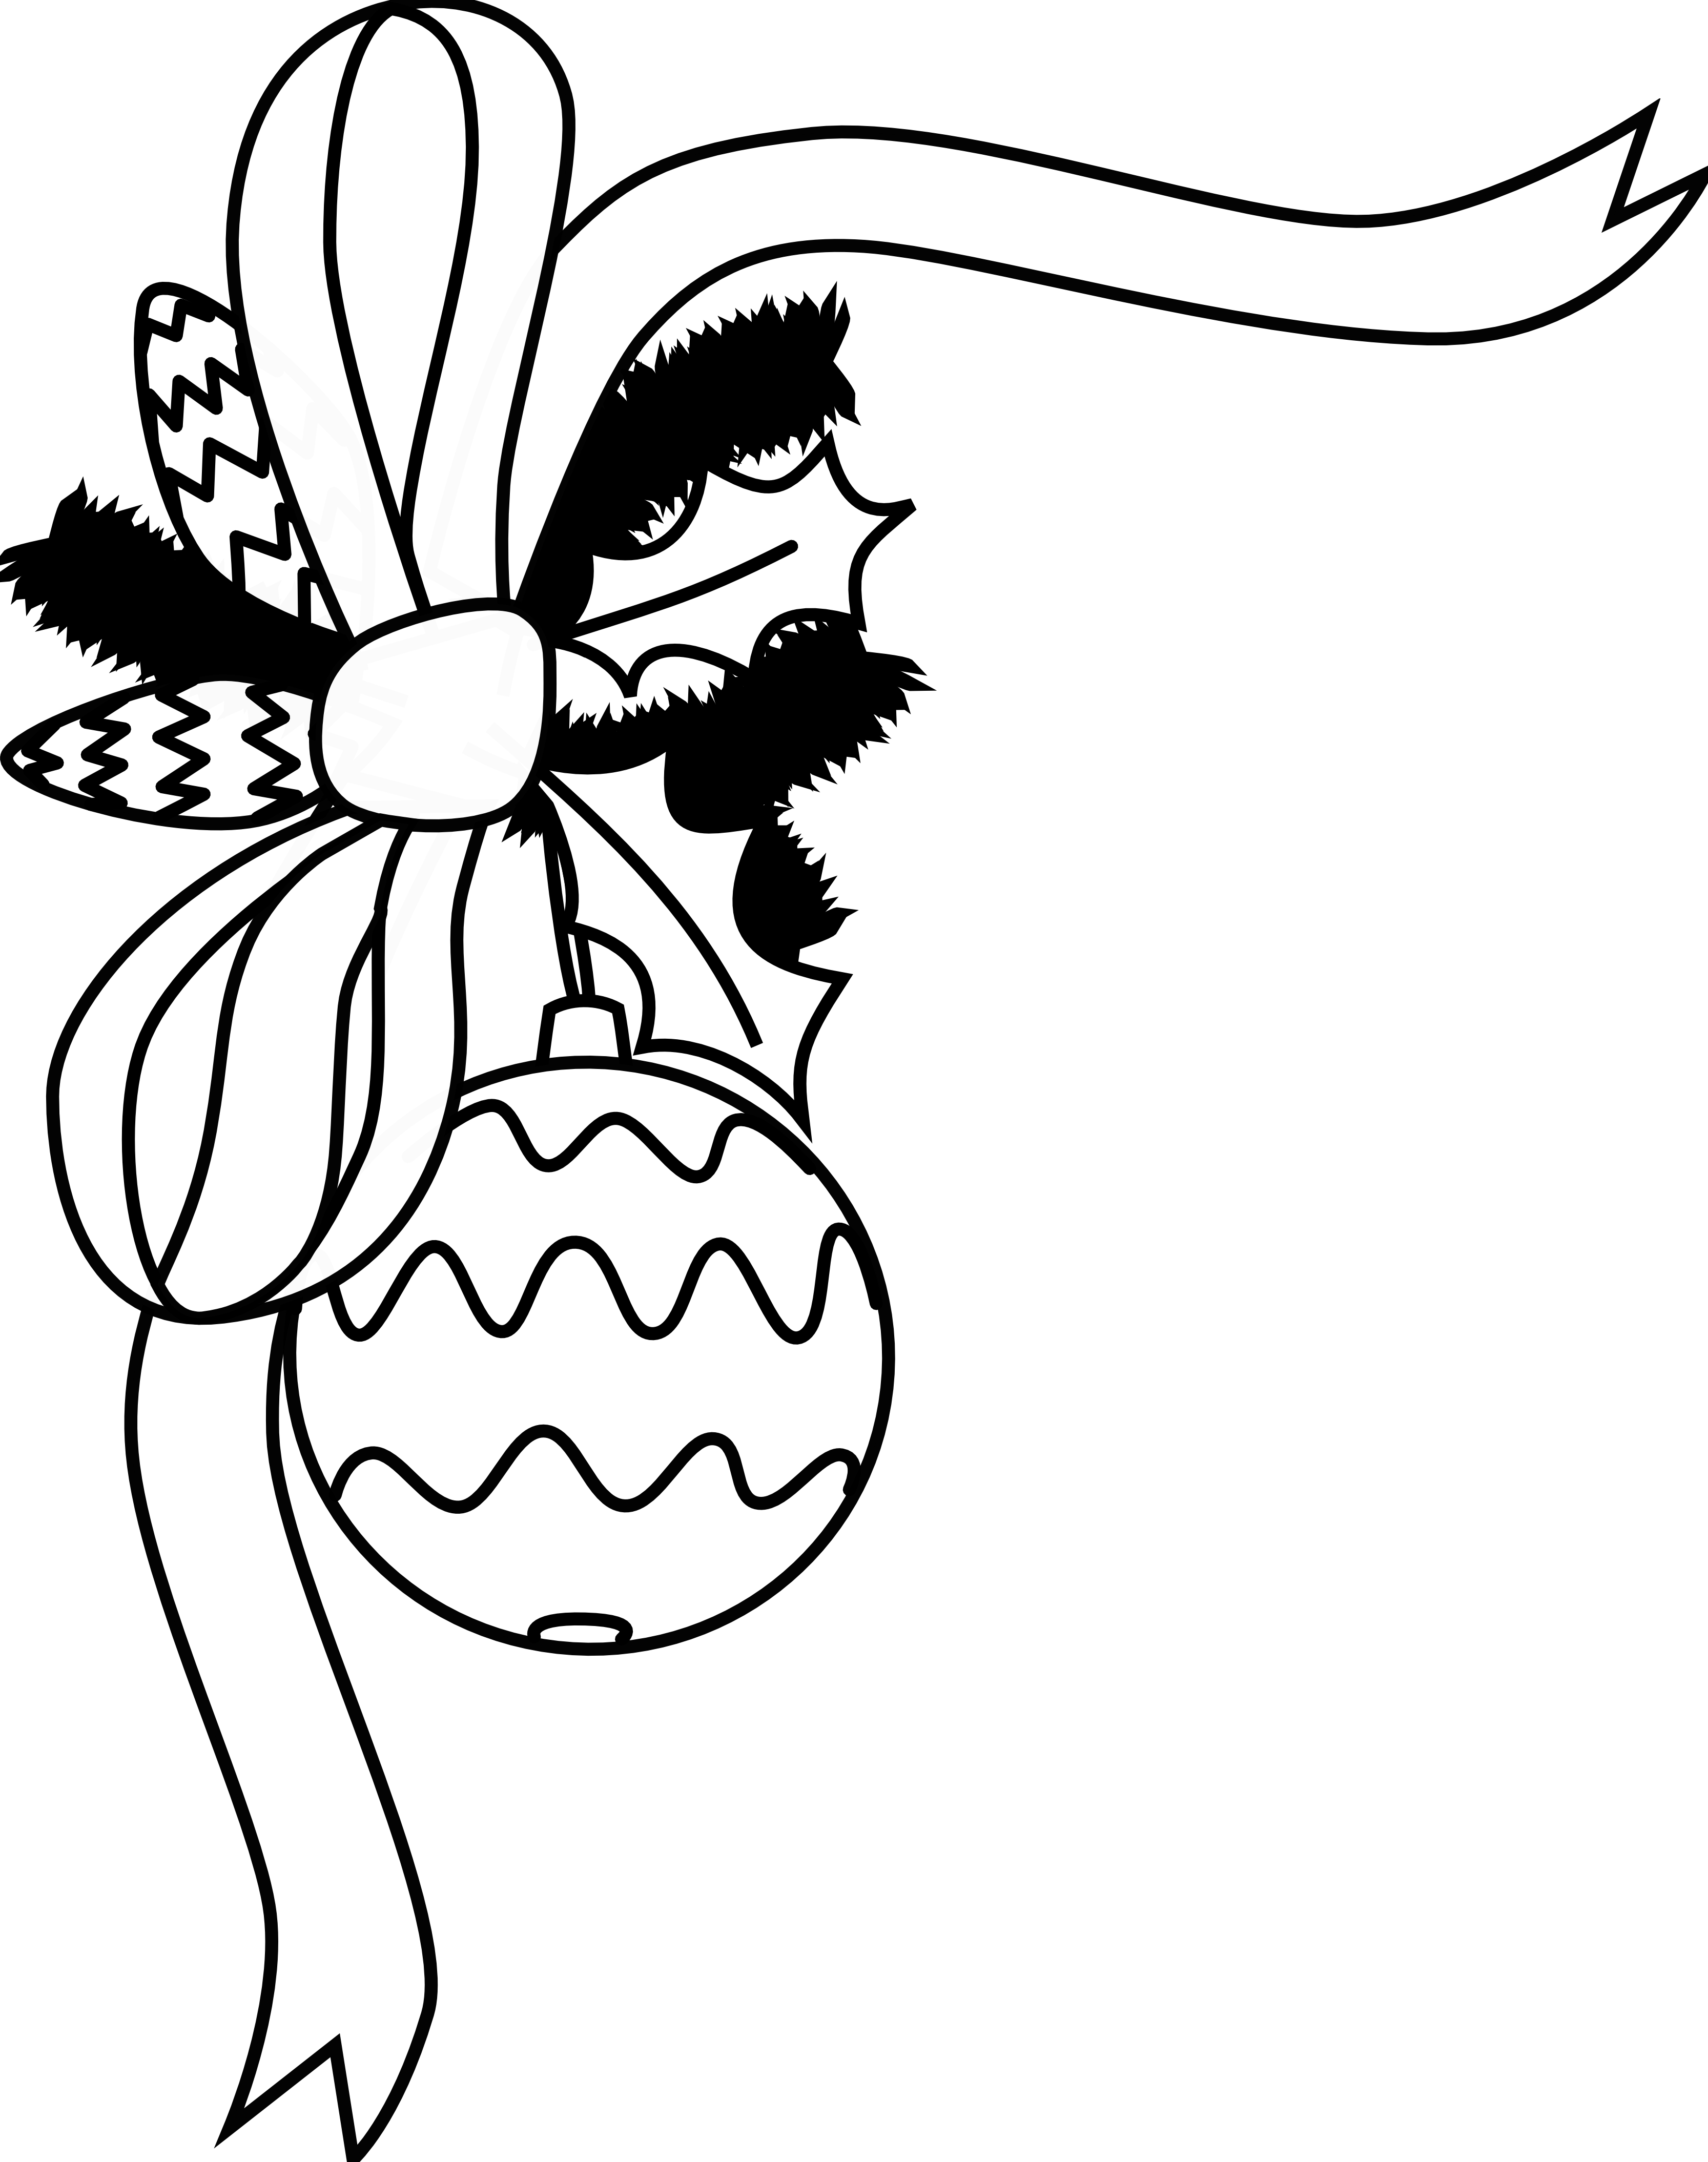 Christmas Black And White Clip Art - ClipArt Best